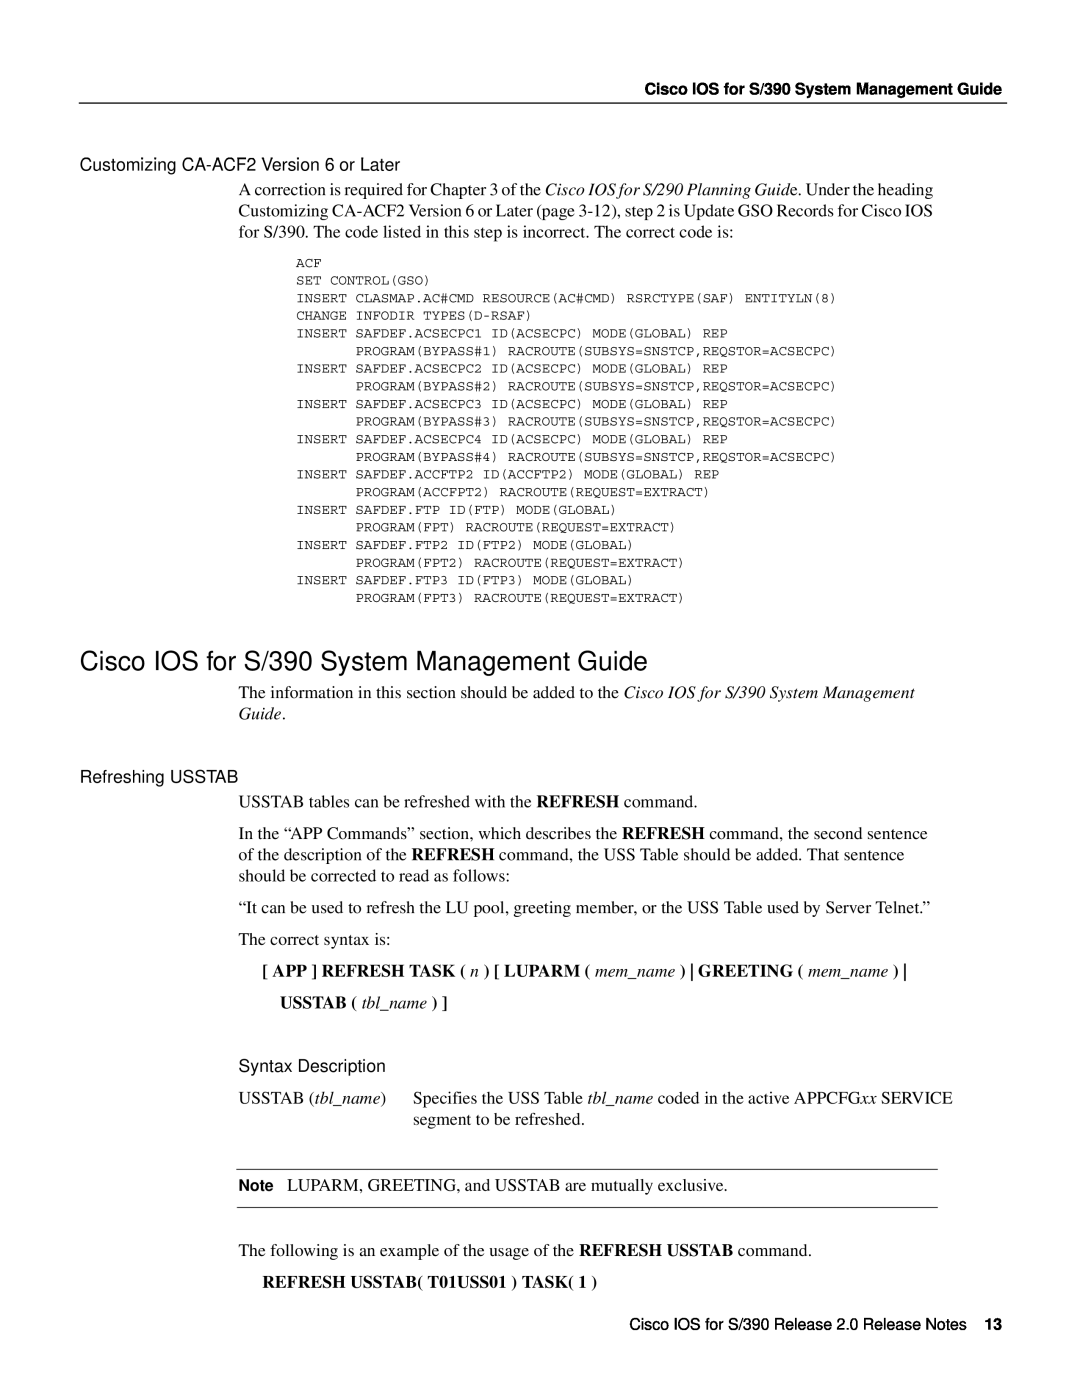 Cisco Systems manual Cisco IOS for S/390 System Management Guide, APP REFRESH TASK n LUPARM memname GREETING memname 